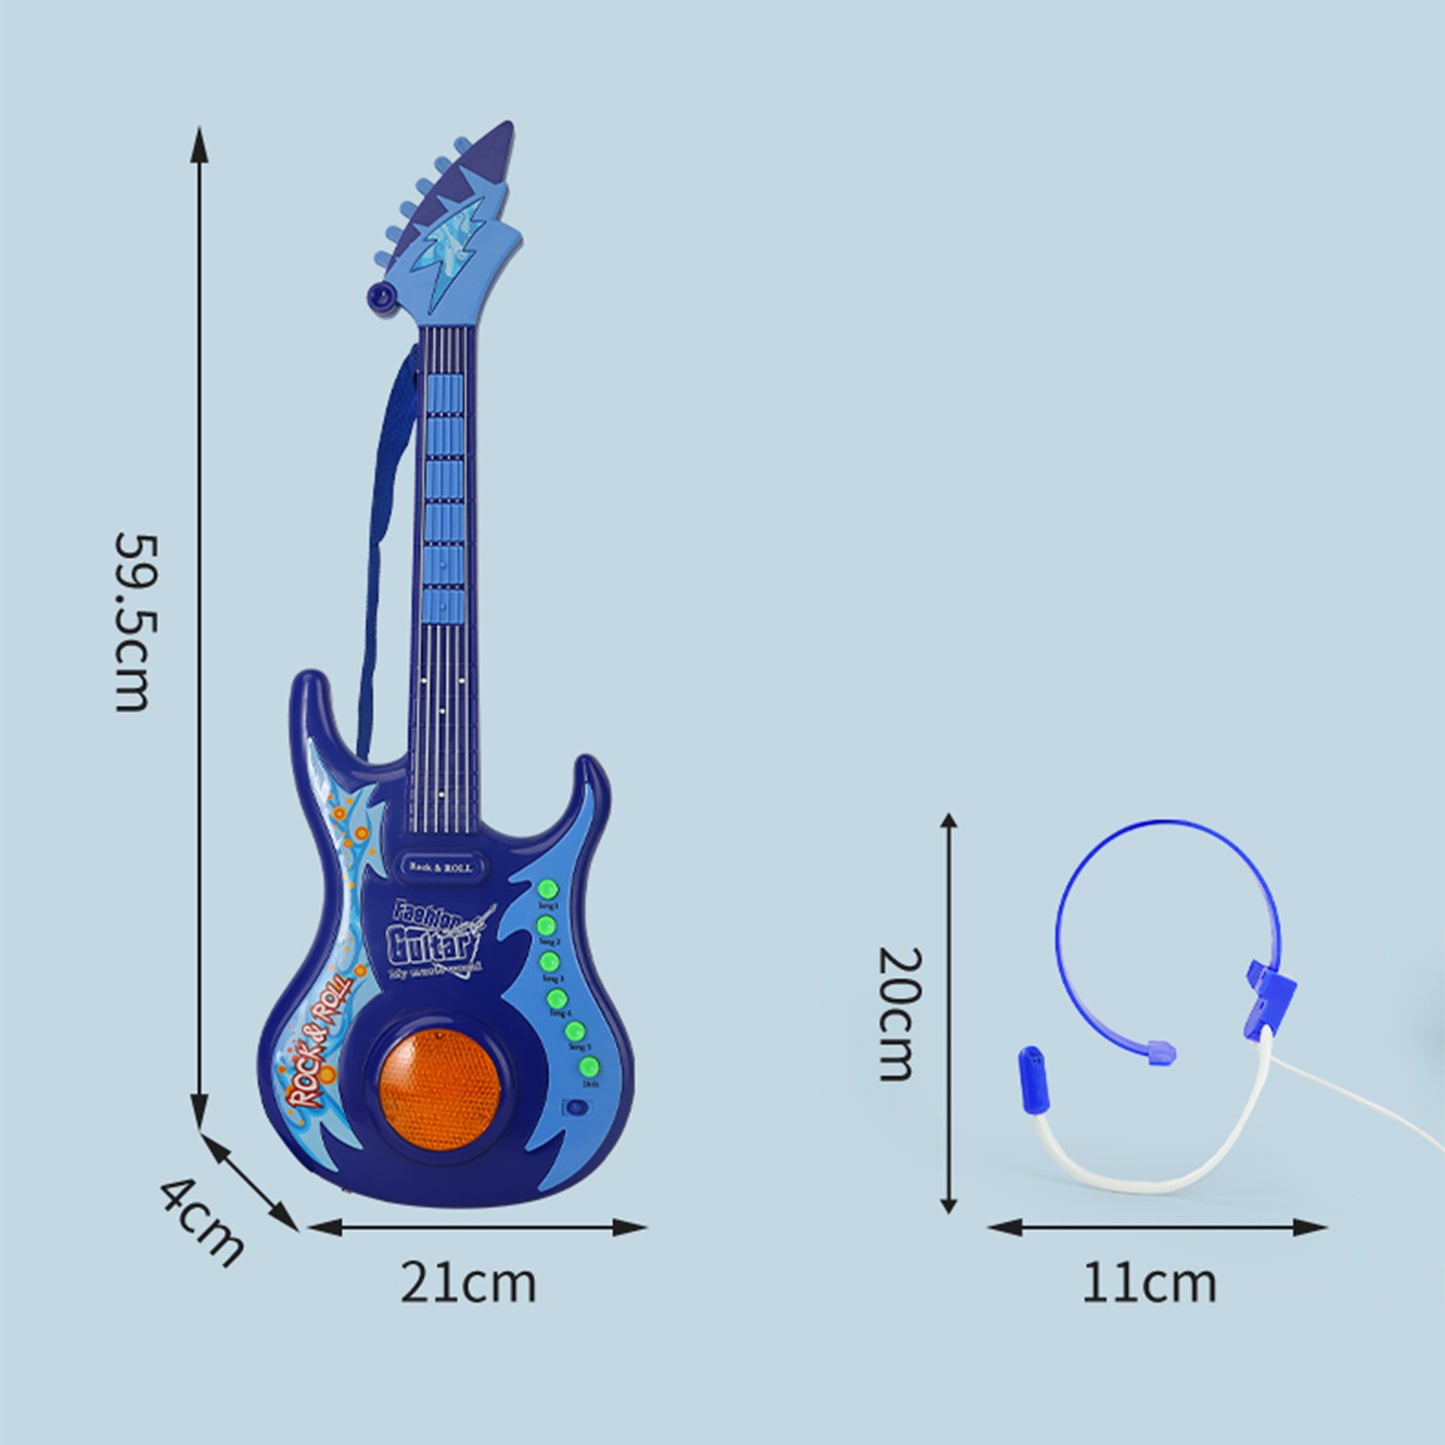 AOQIMITENJOY Musical Instrument Electronic Guitar Toys with Earhook Microphone LED Lighting Karaoke Birthday Gifts for Boys and Girls 3 Year Old+ HK-9000B